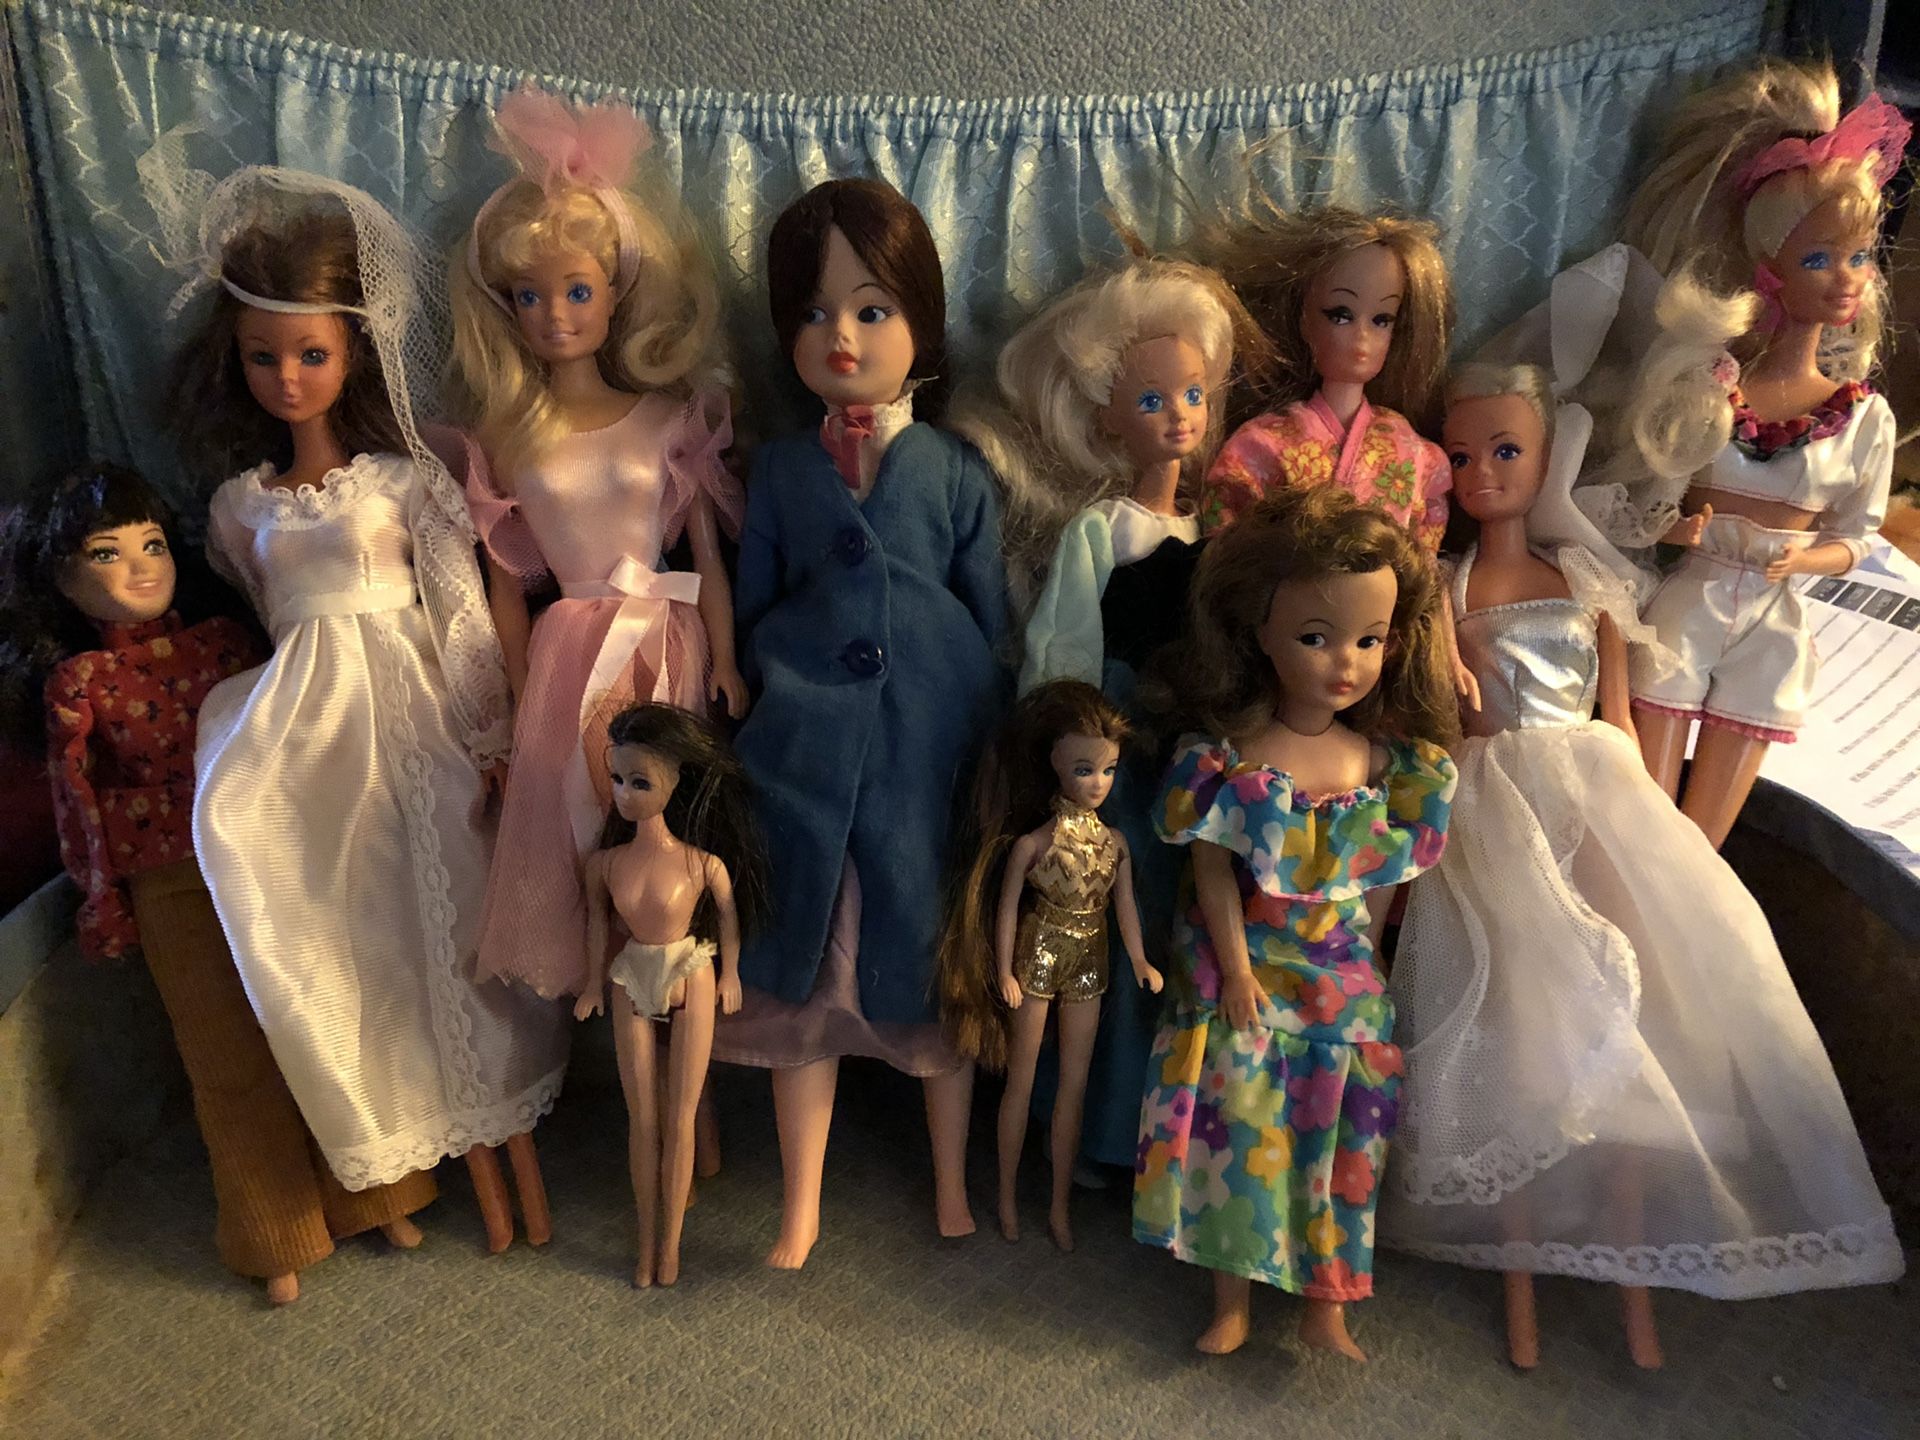 Lot of vintage collectible Barbies.